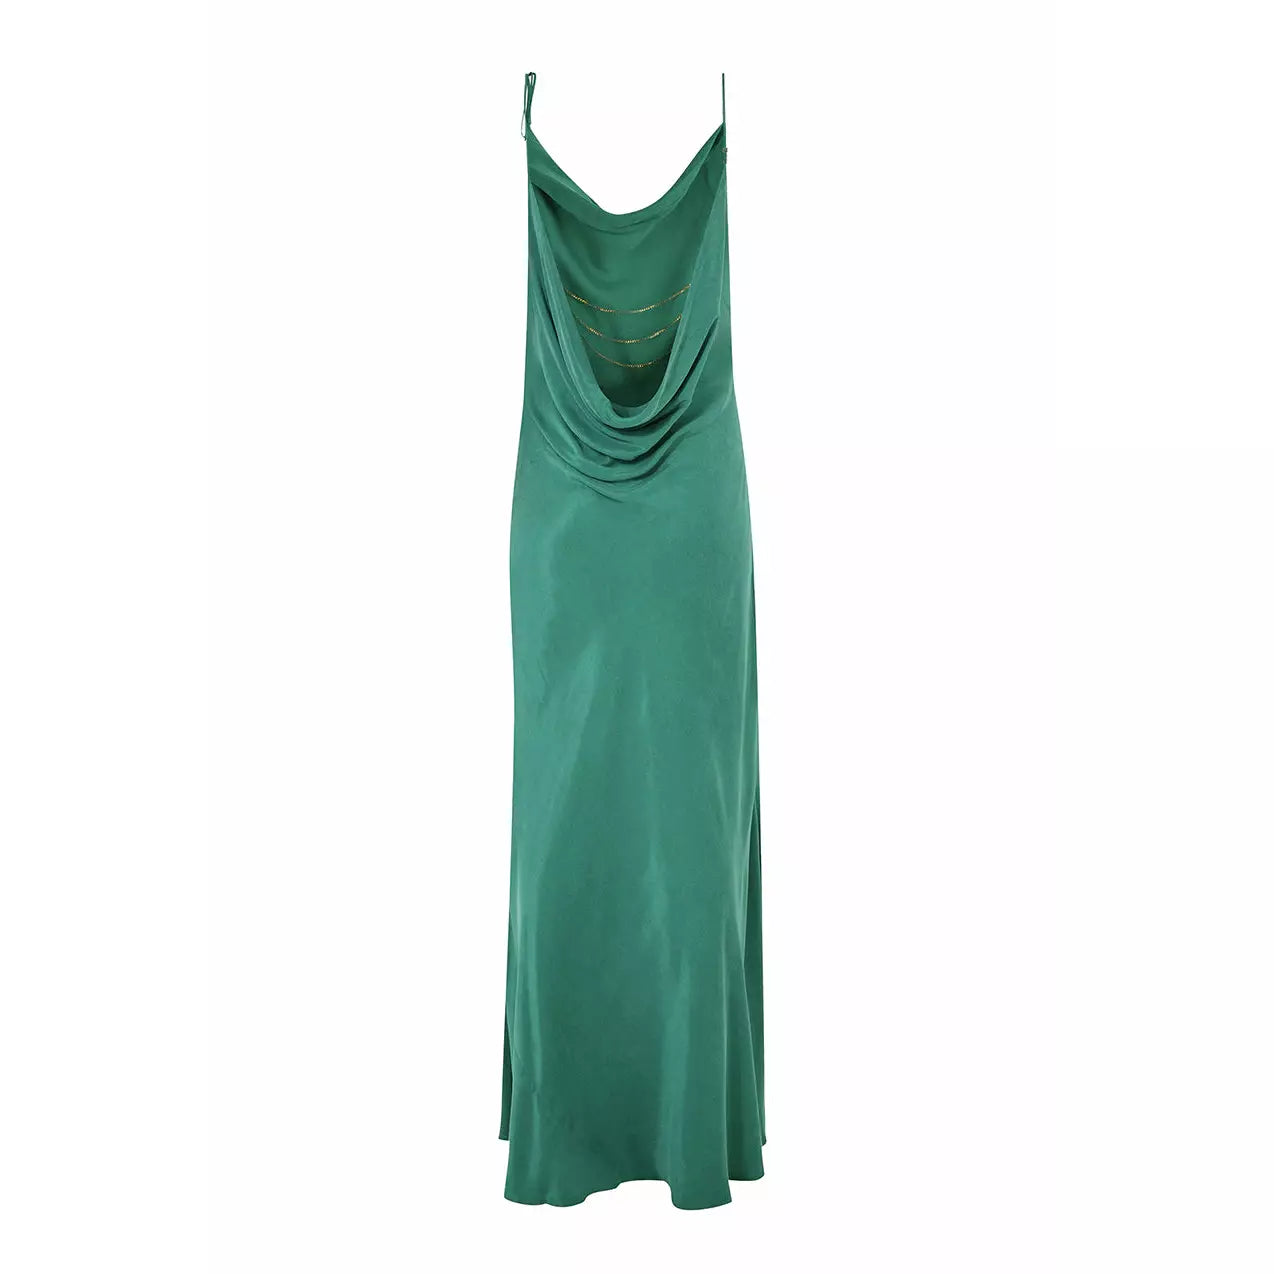 Rat & Boa Green Ophelia Maxi Dress – greens are good for you